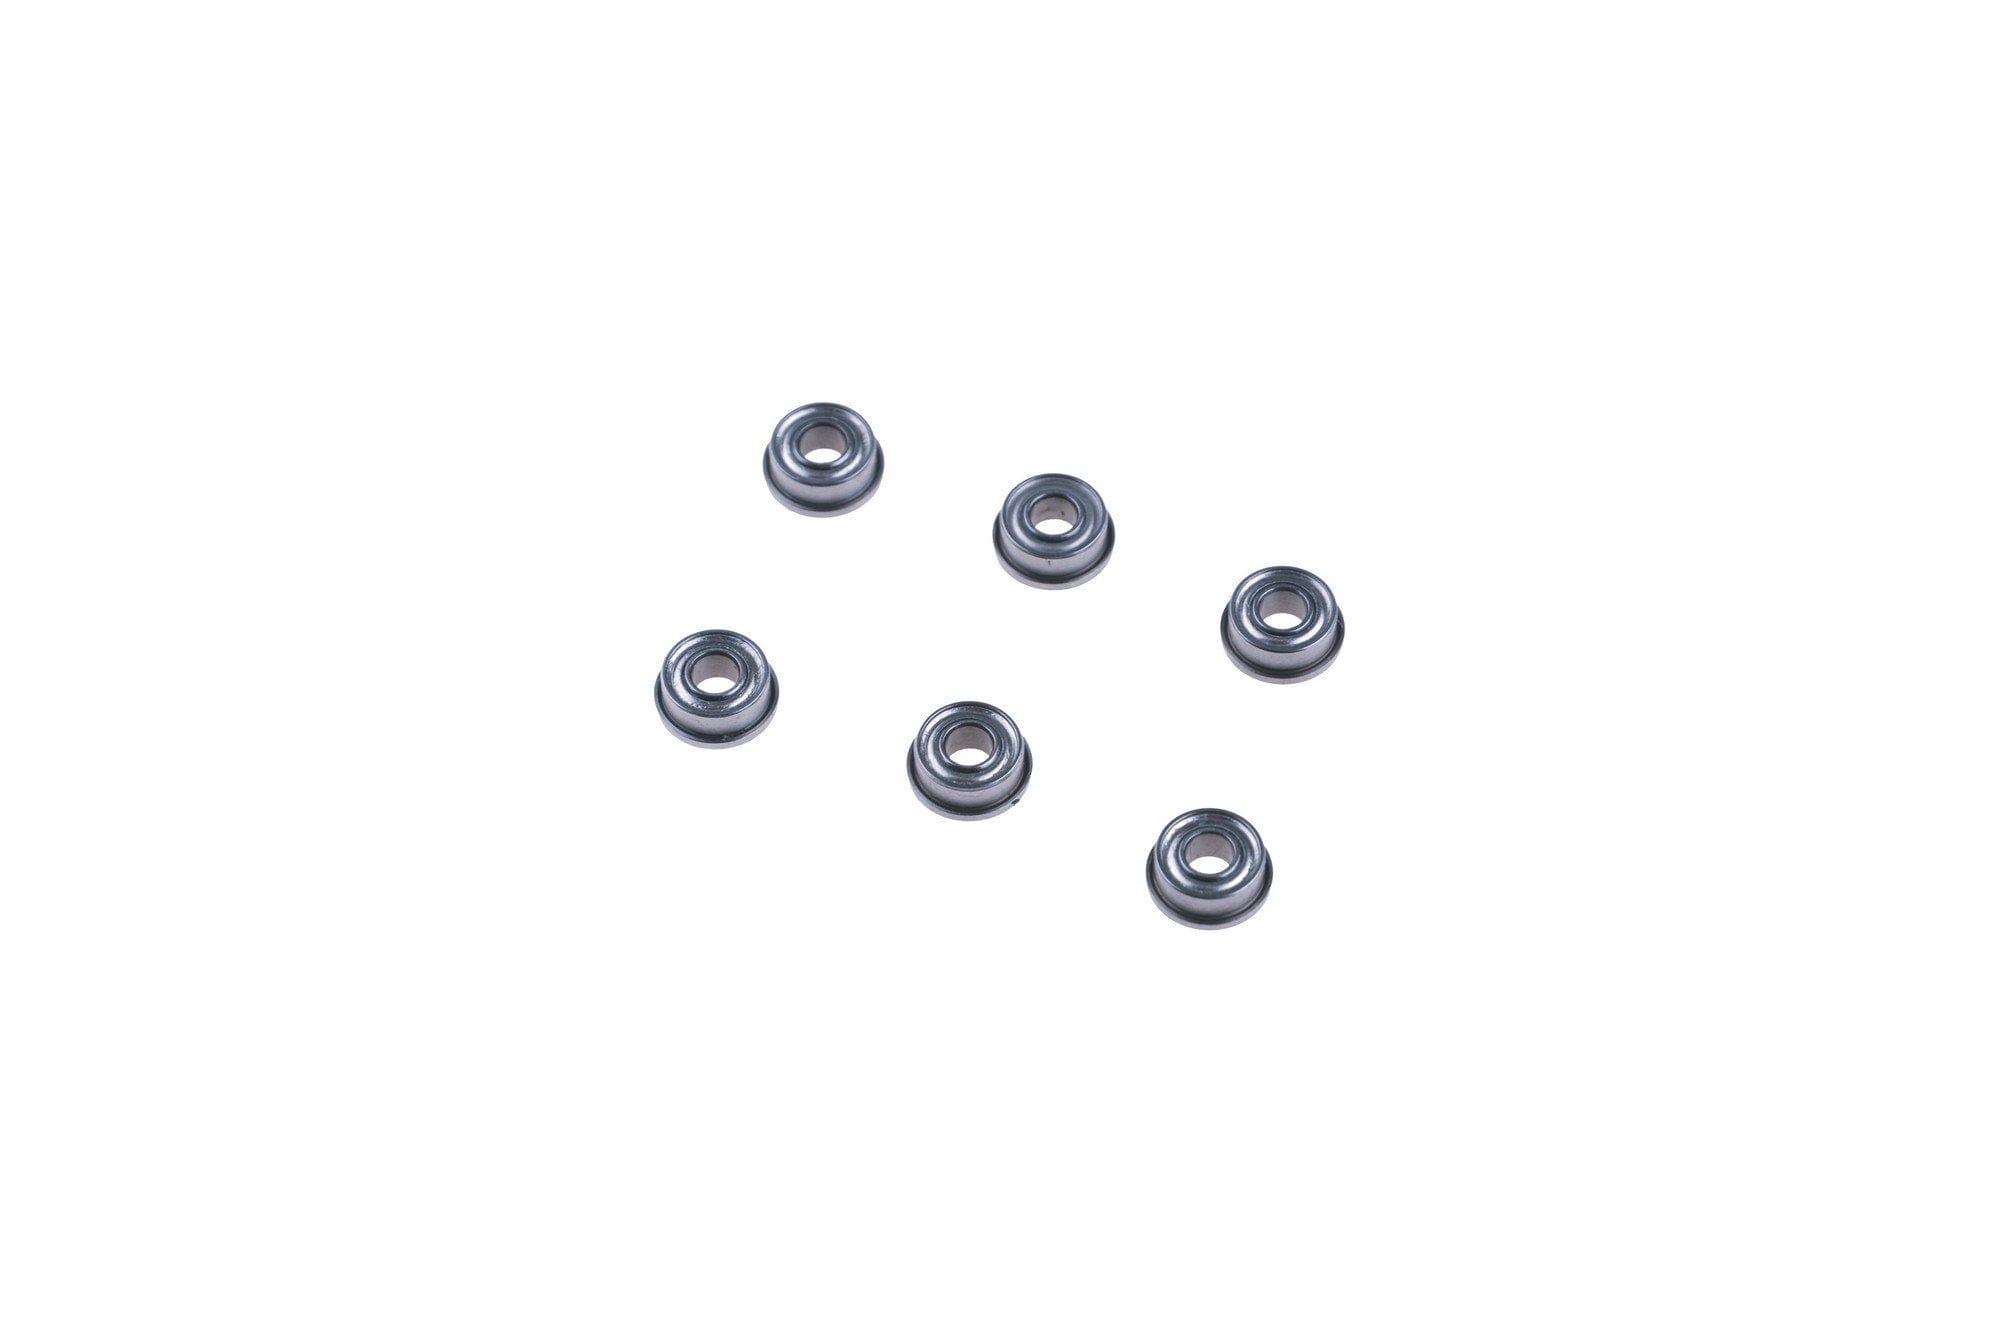 6pcs 7mm ball bearing set by Specna Arms on Airsoft Mania Europe